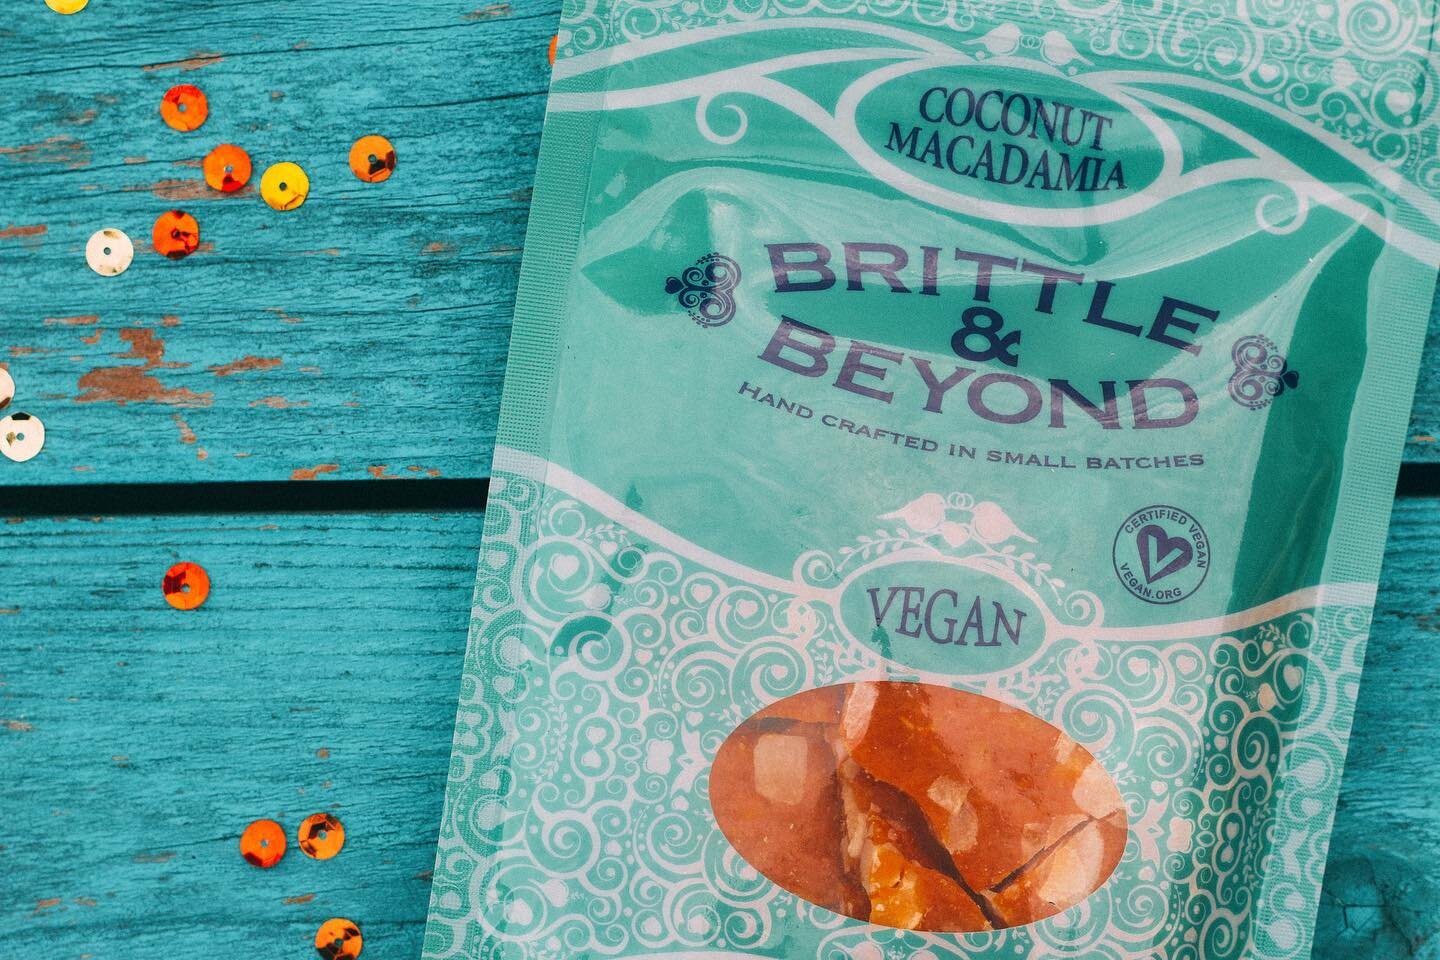 What's cheaper than booking a flight to Hawaii? ✈️

Buying a bag of our tropical Coconut Macadamia brittle!
.
.
.
#brittle #candybrittle #dessertflavors #dessertheaven #hawaiiflights #hawaiiflavors #coconutflavor 
#coconutmacadamia #nutbrittle #macad